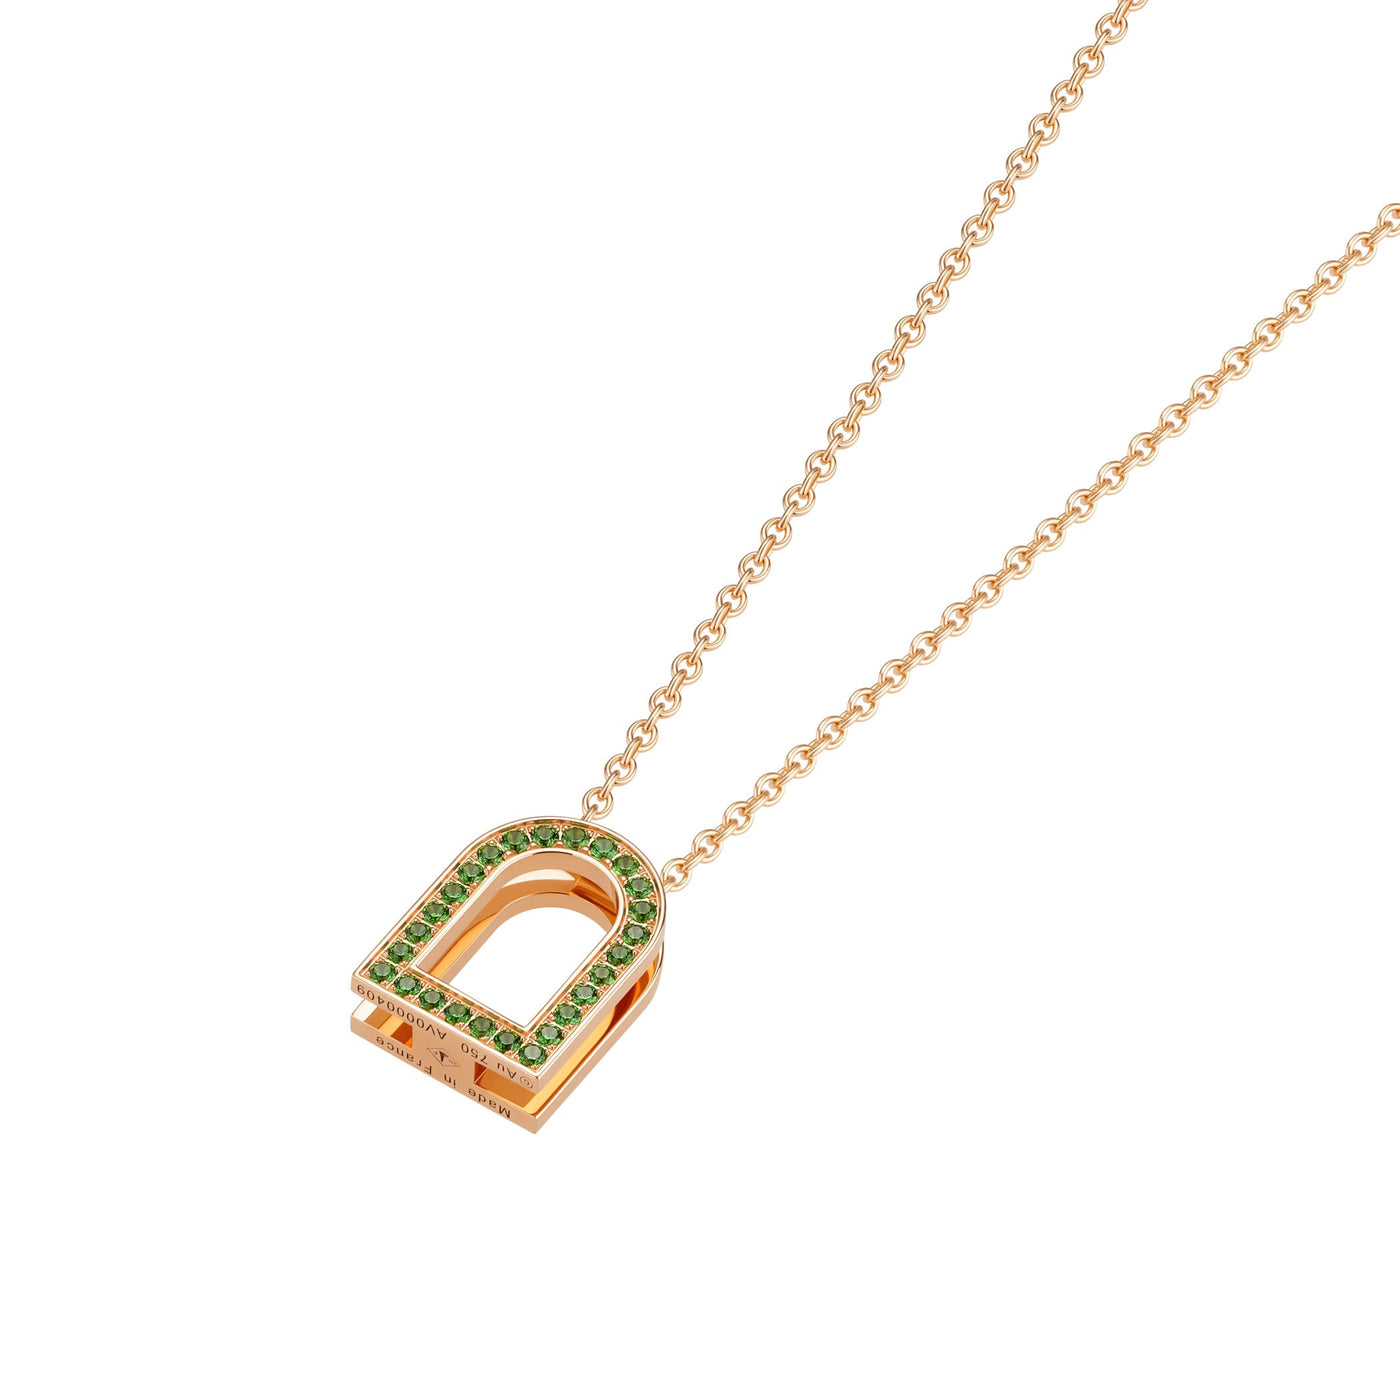 L'Arc Voyage Charm MM, 18k Rose Gold with Galerie Tsavorites on Chain Necklace - DAVIDOR